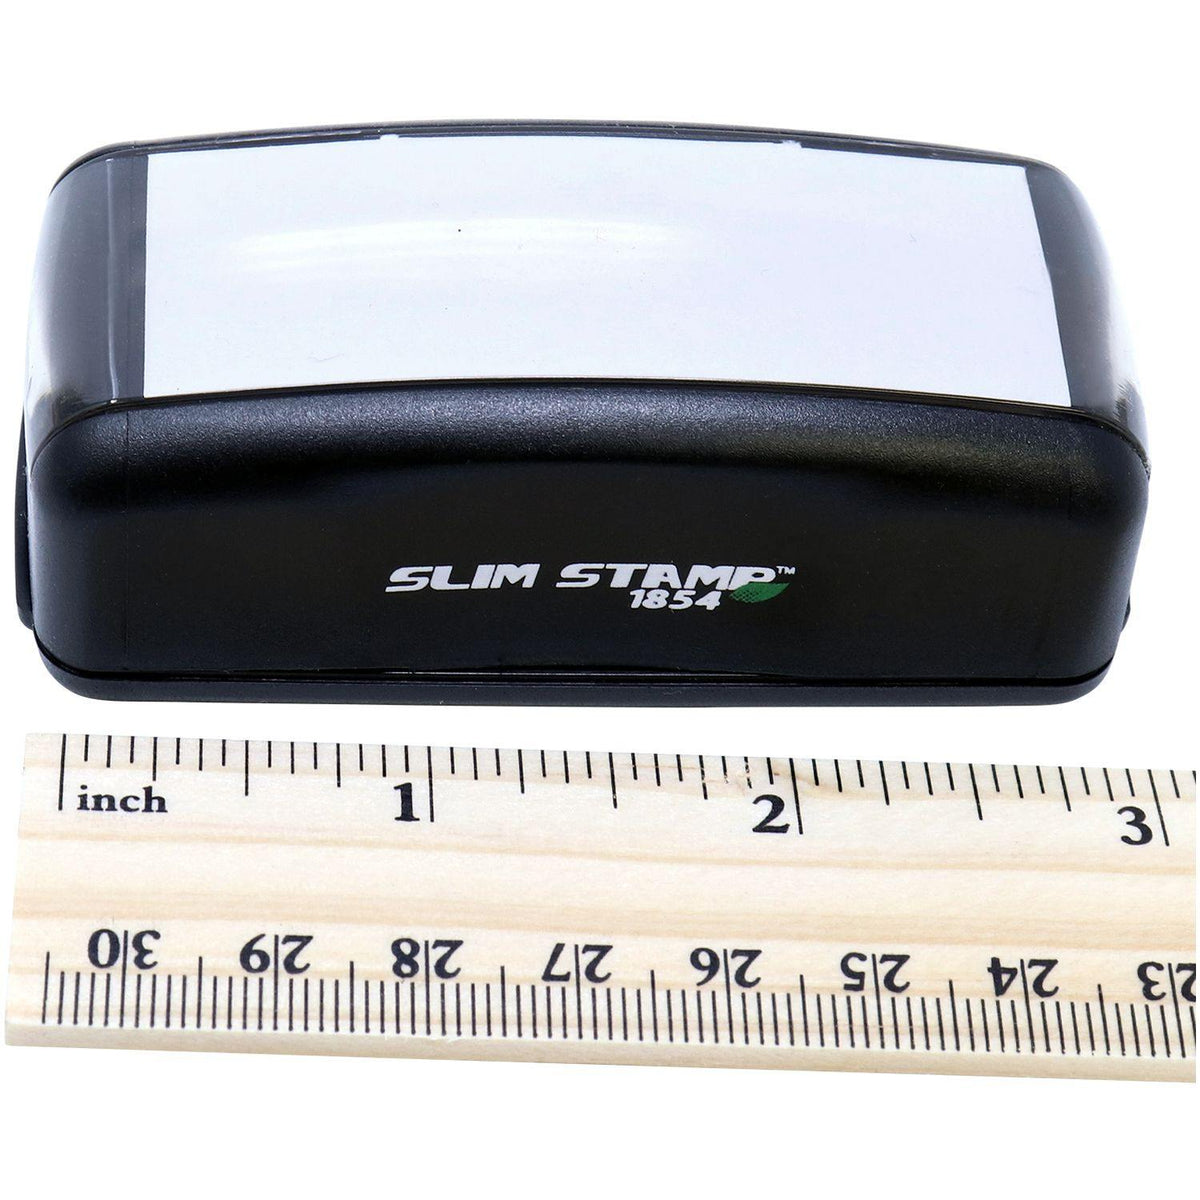 Measurement Large Pre-Inked Surface Stamp with Ruler